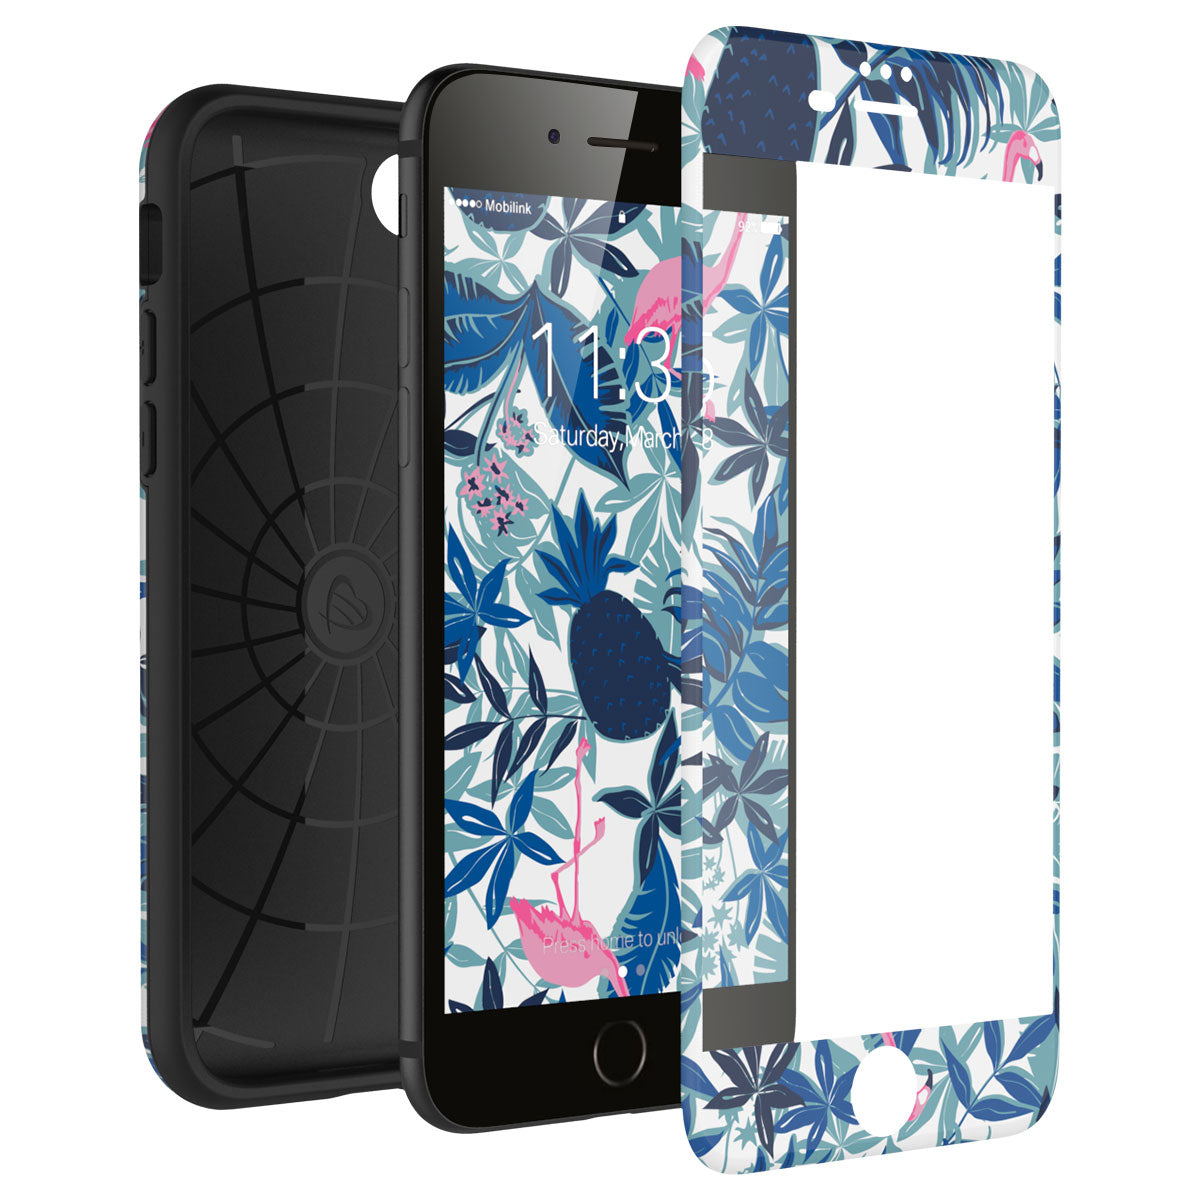 LUVVITT ARTOLOGY Case and Tempered Glass Set for iPhone 7/8 Plus - Bundle P002